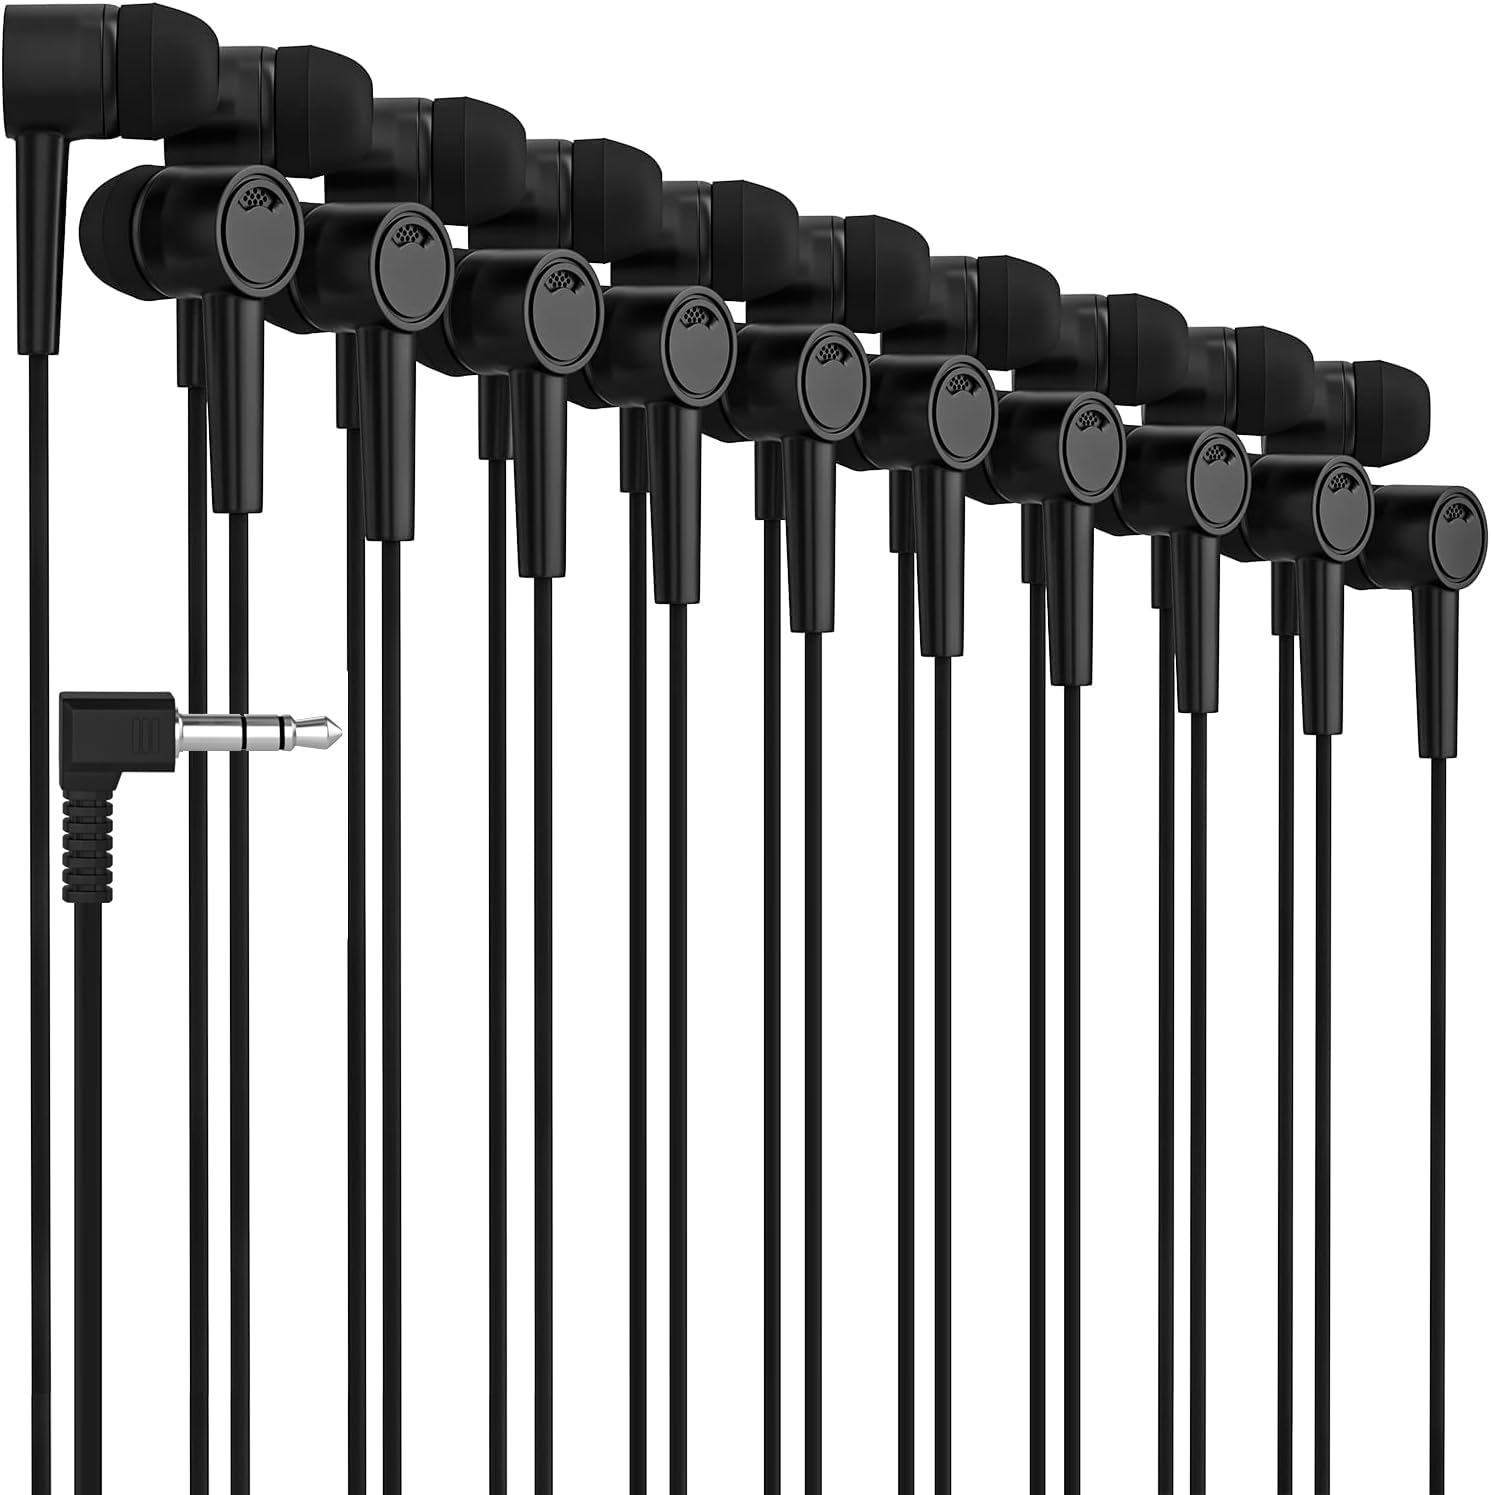 Maeline Bulk Earbuds 10 Pack Black in-Ear Stereo Headphones for School Classroom, Library, Travel, Gym 3.5mm Jack, Tangle-Free Wired Earphones for MP3, Phones, Computer and Laptops